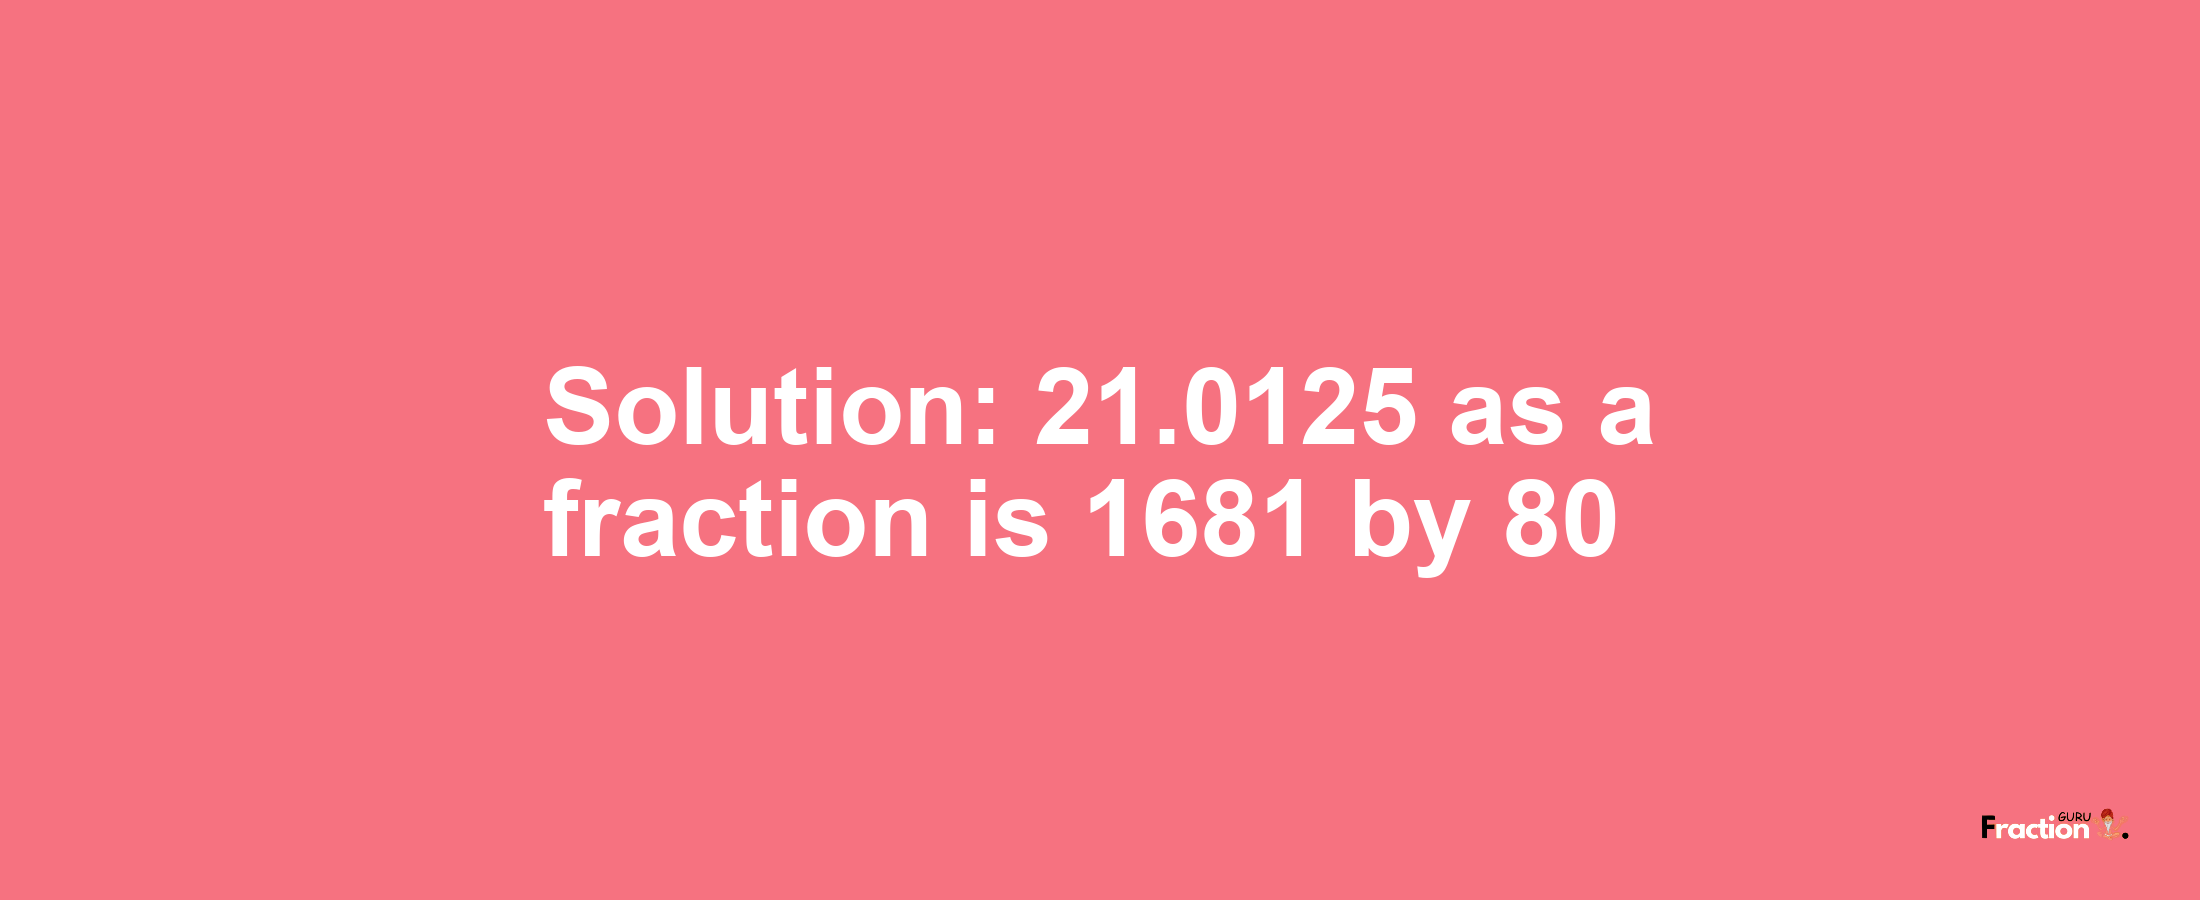 Solution:21.0125 as a fraction is 1681/80